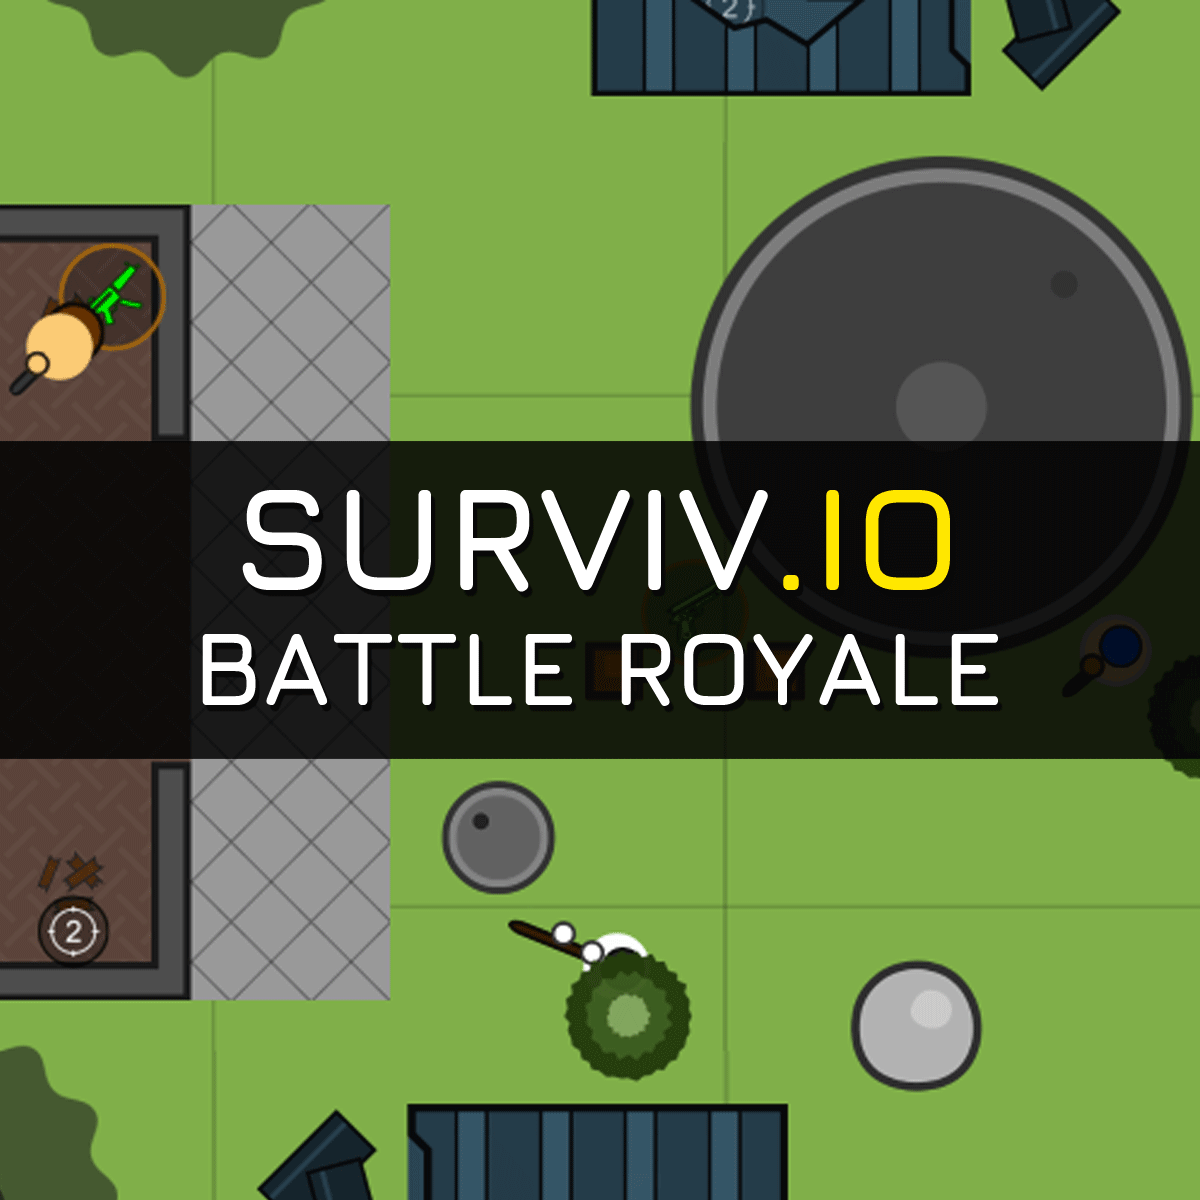 UPDATE!][Game] Survive2D: will you survive? (prob not) - Replit